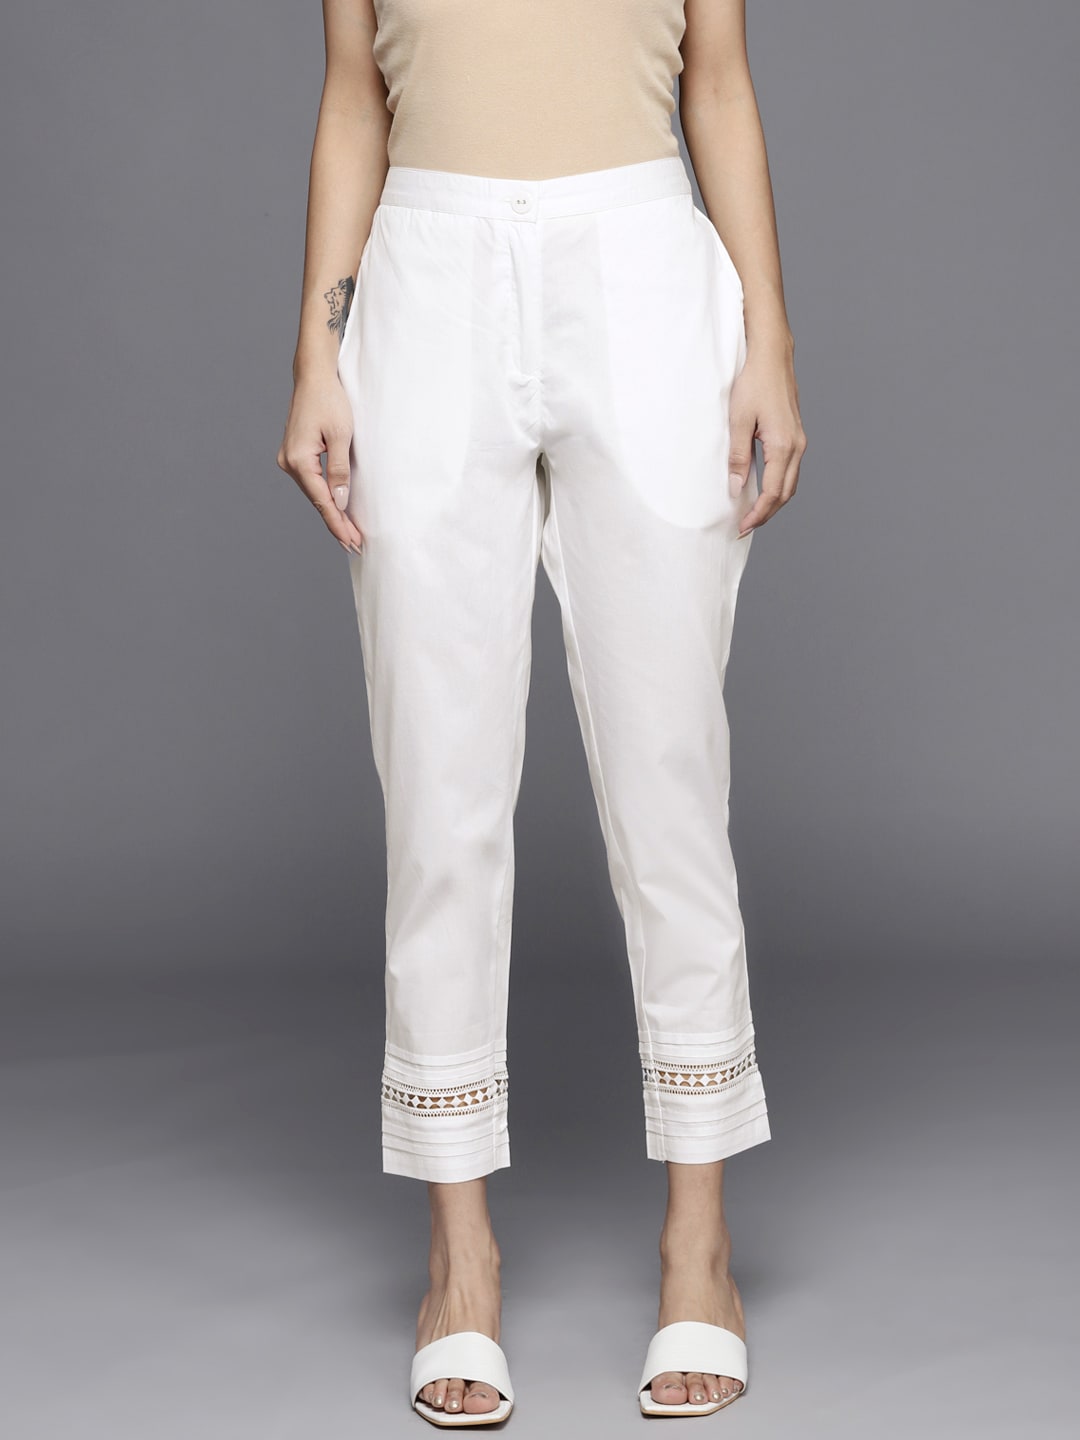 Libas Women Off White Trousers Price in India